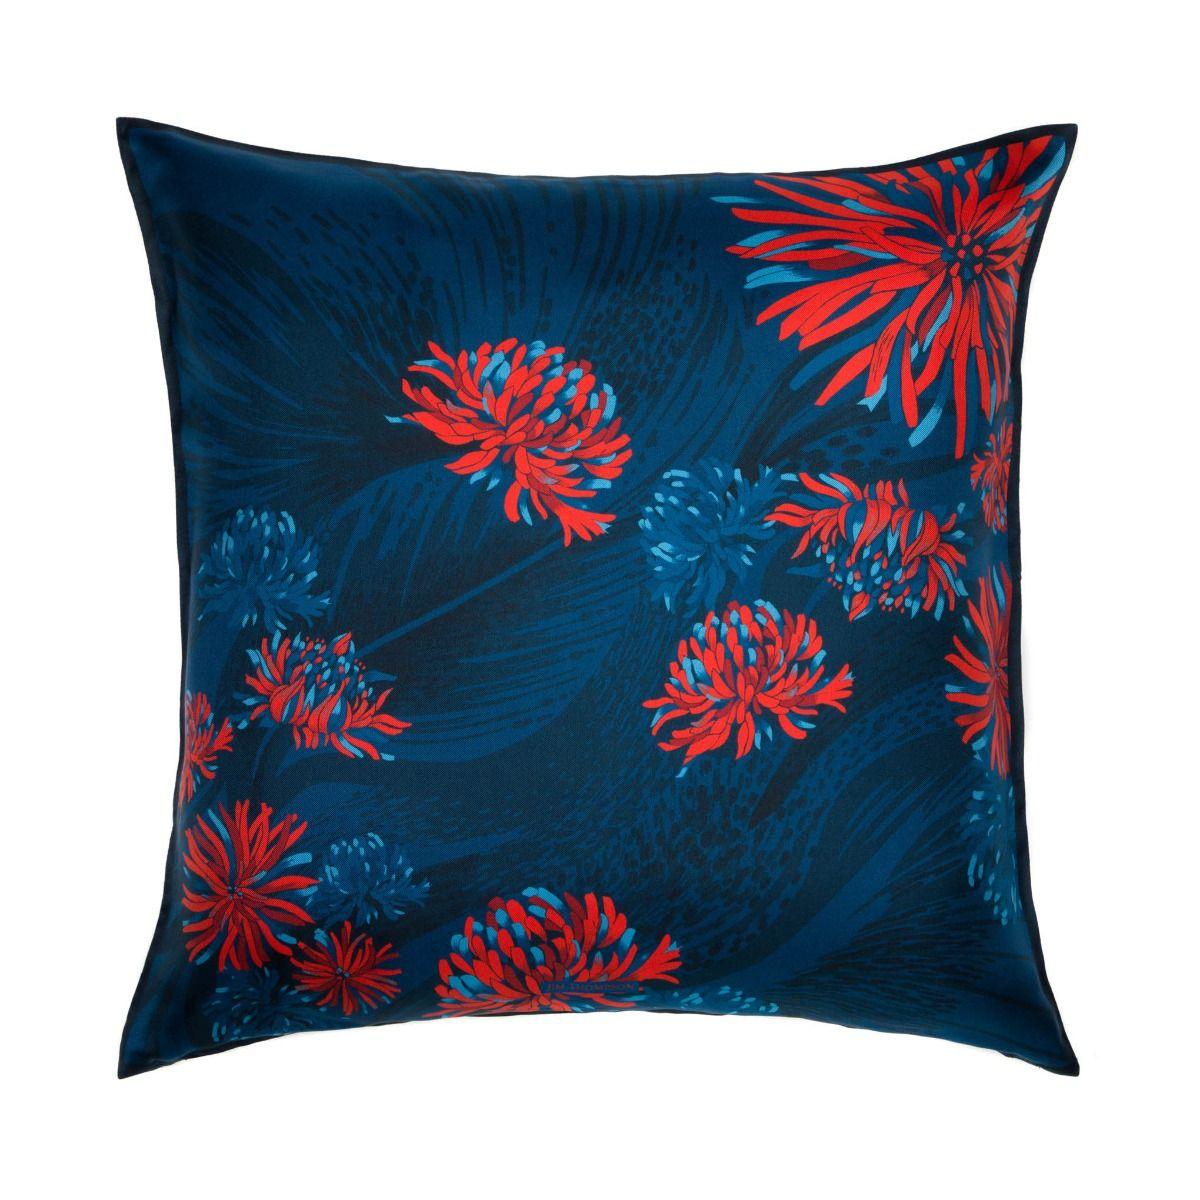 Blooming Flower Silk Cushion Cover 18" - Navy